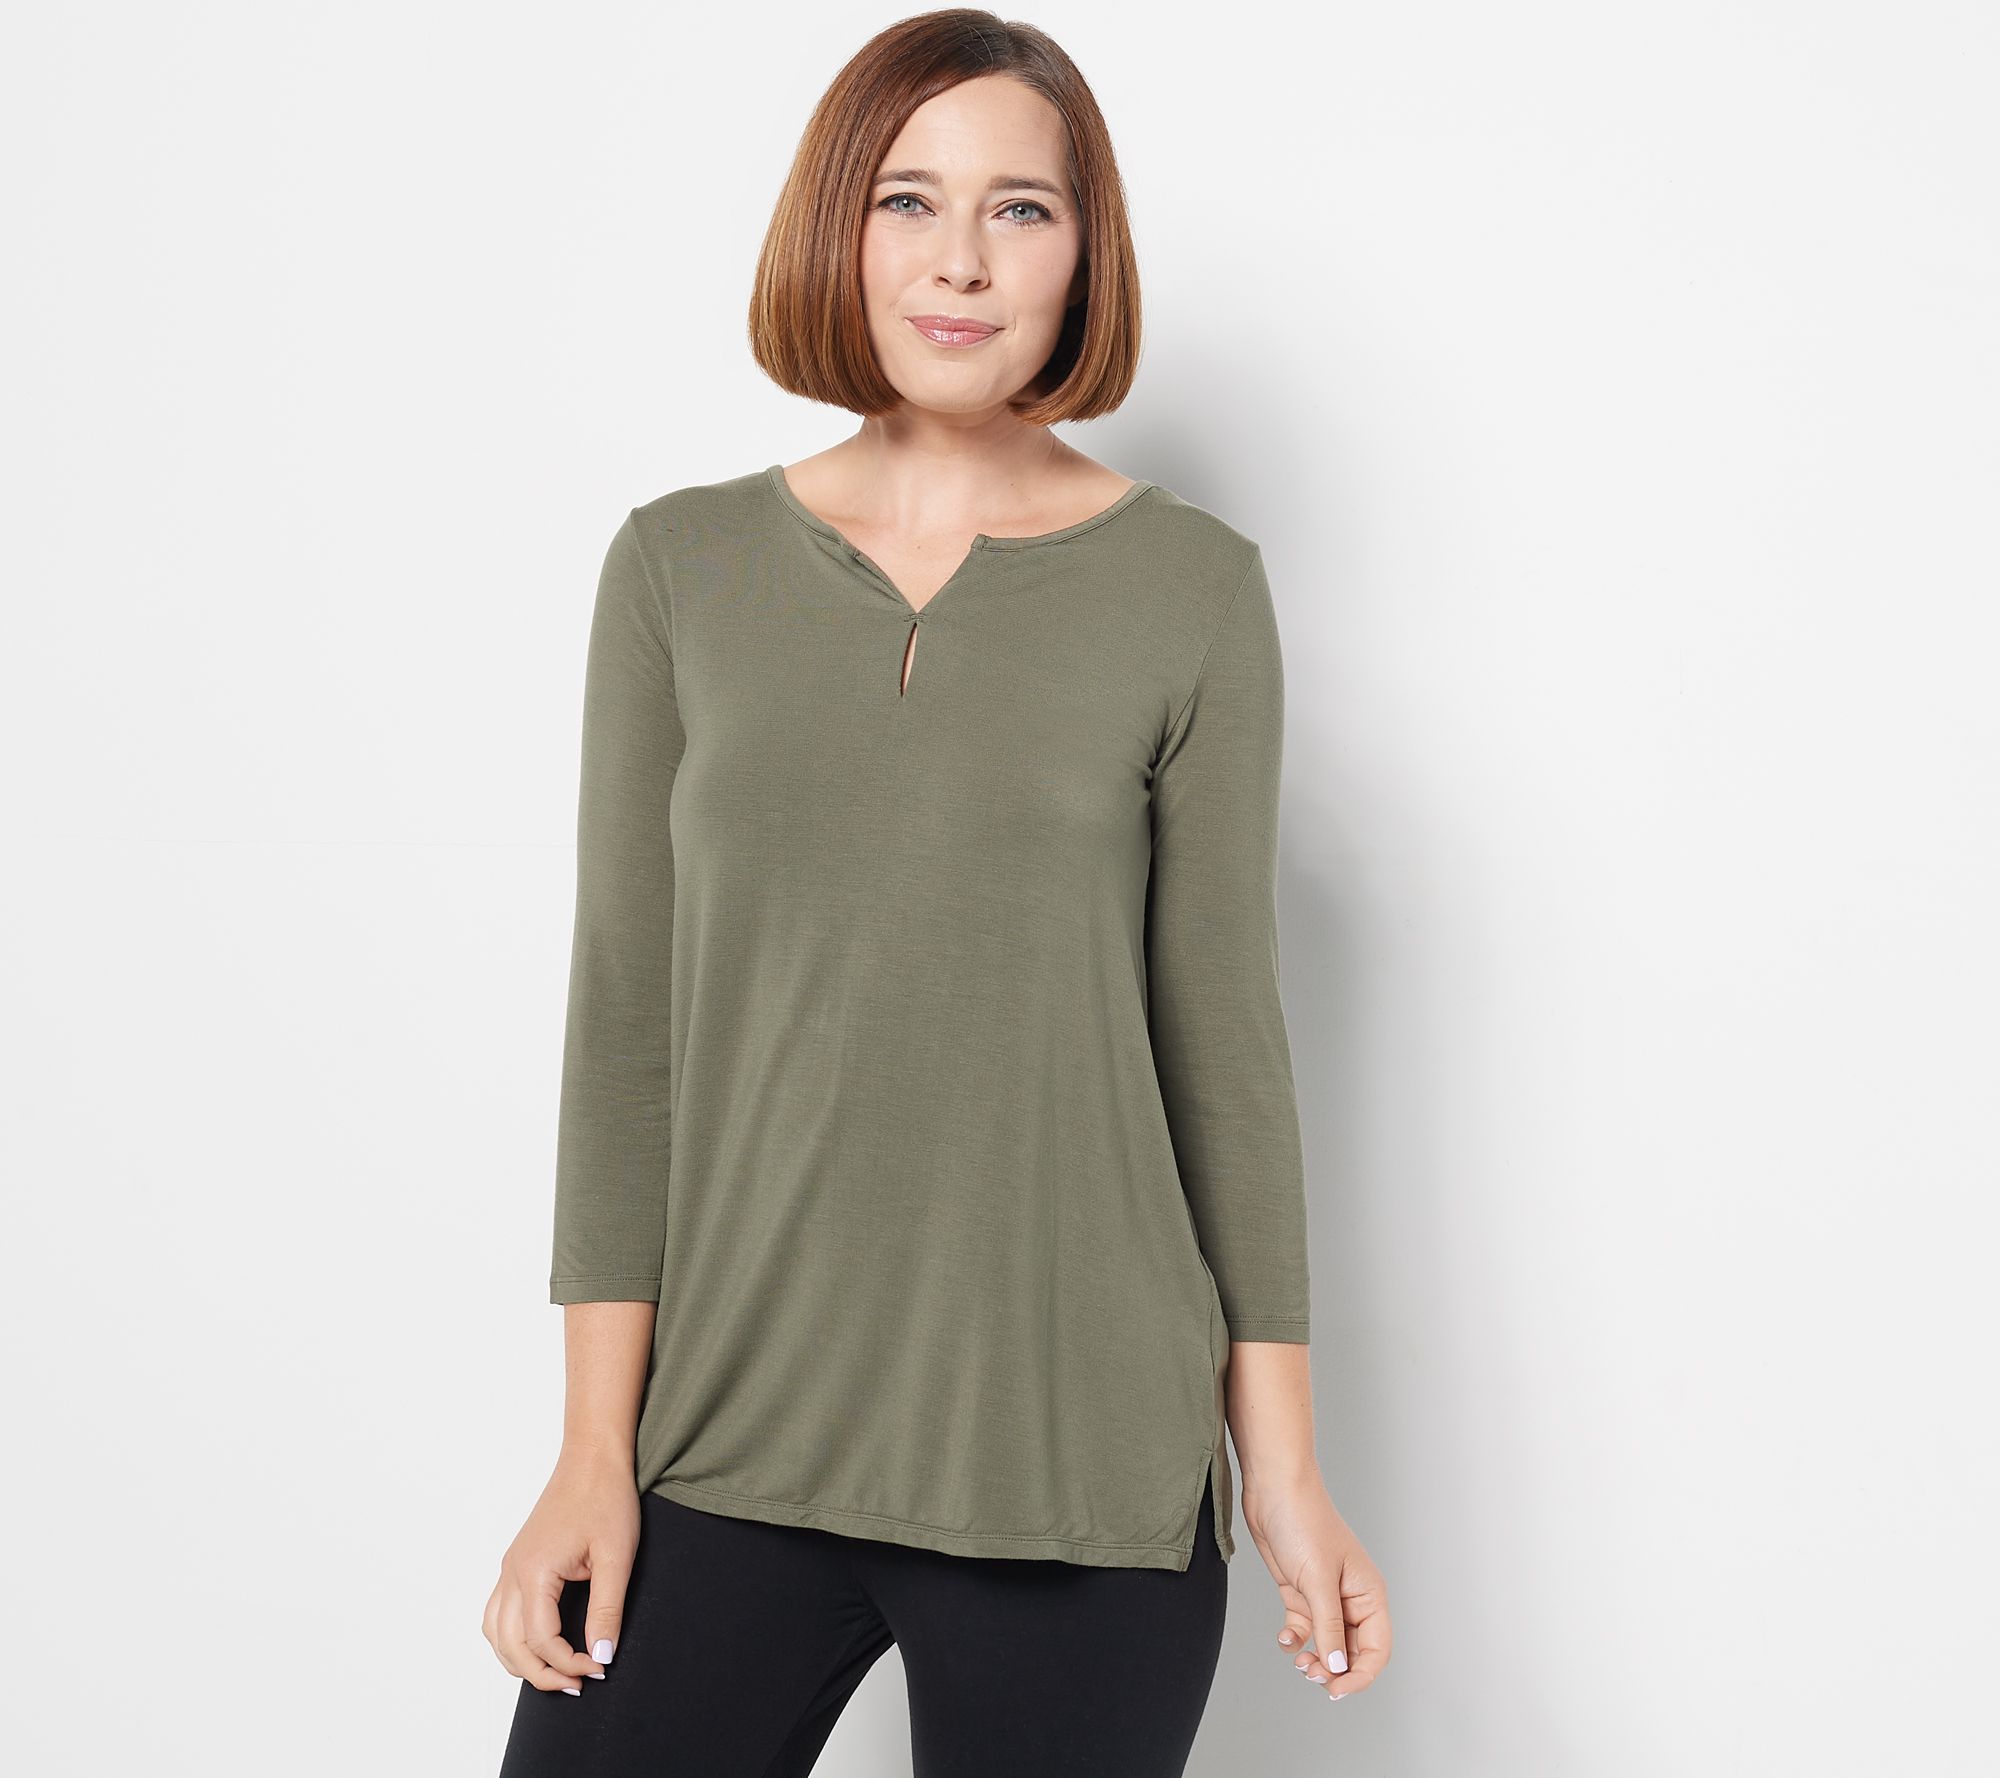 Cuddl Duds Softwear with Stretch Long Sleeve V-Neck Top for Women 